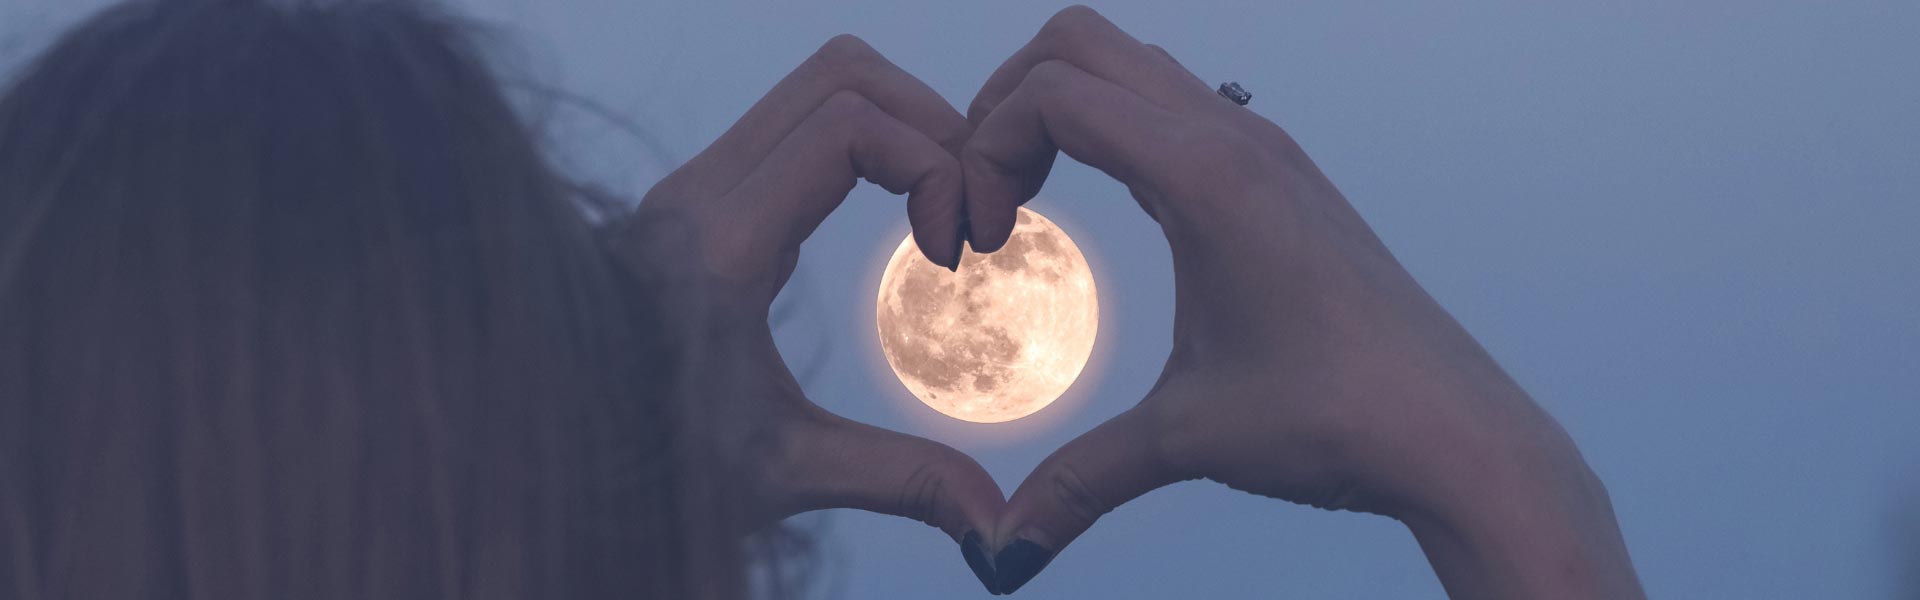 A woman holding her hands in shape of a heart around the full moon on the sky at night